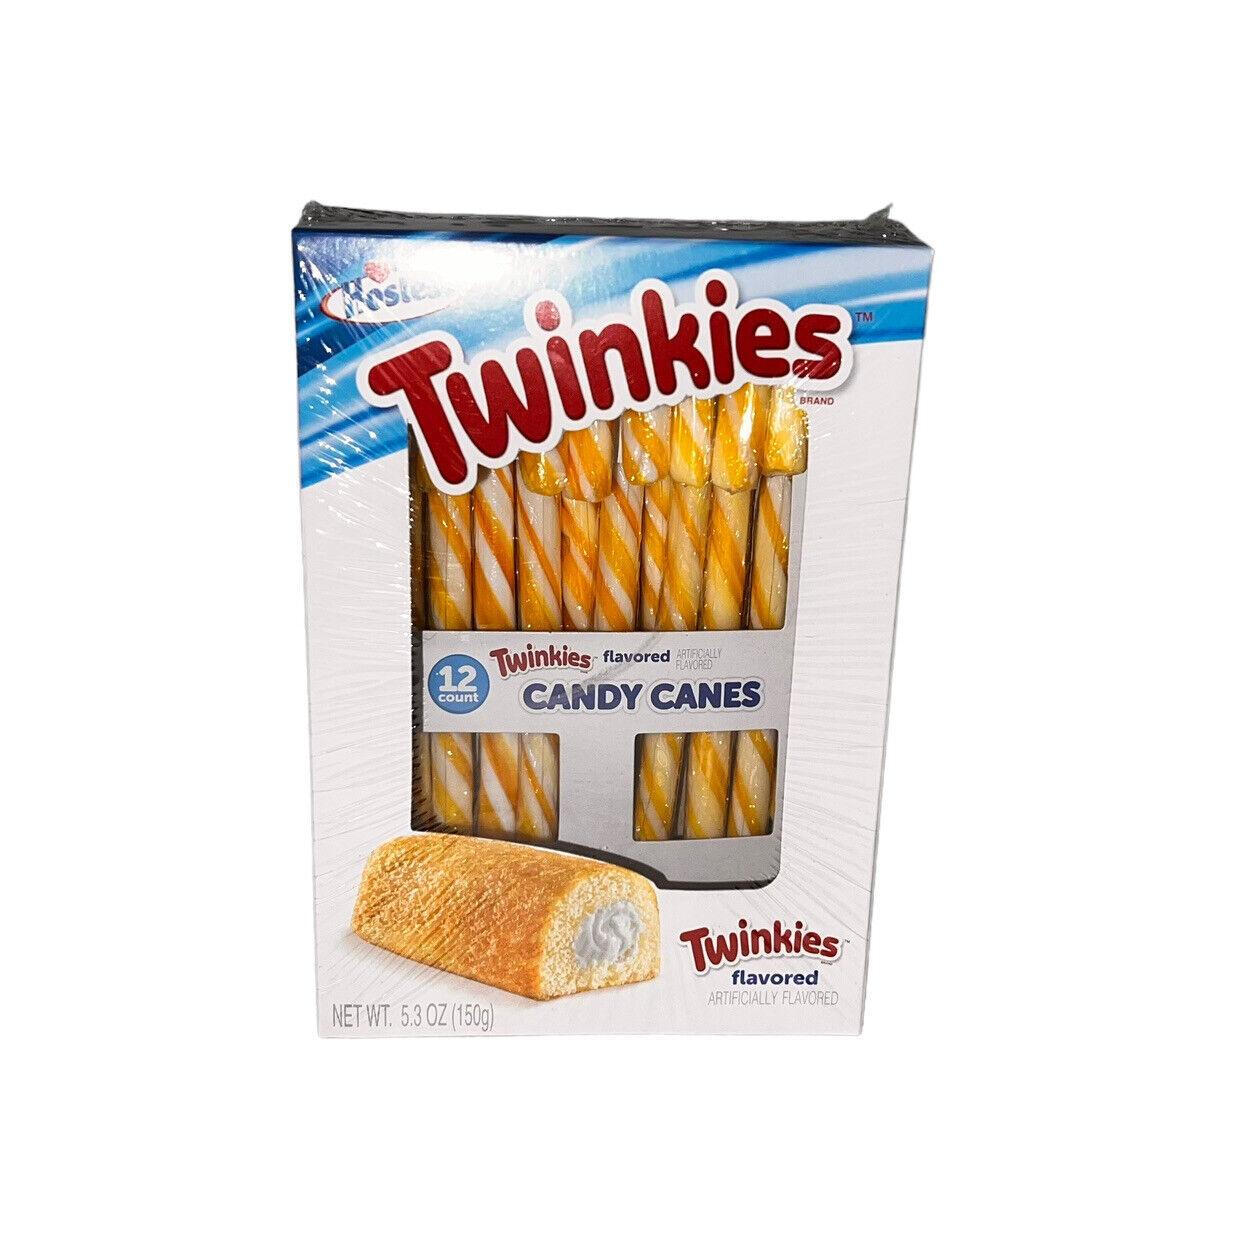 Hostess Twinkies Candy Canes 12 Count - Extreme Snacks